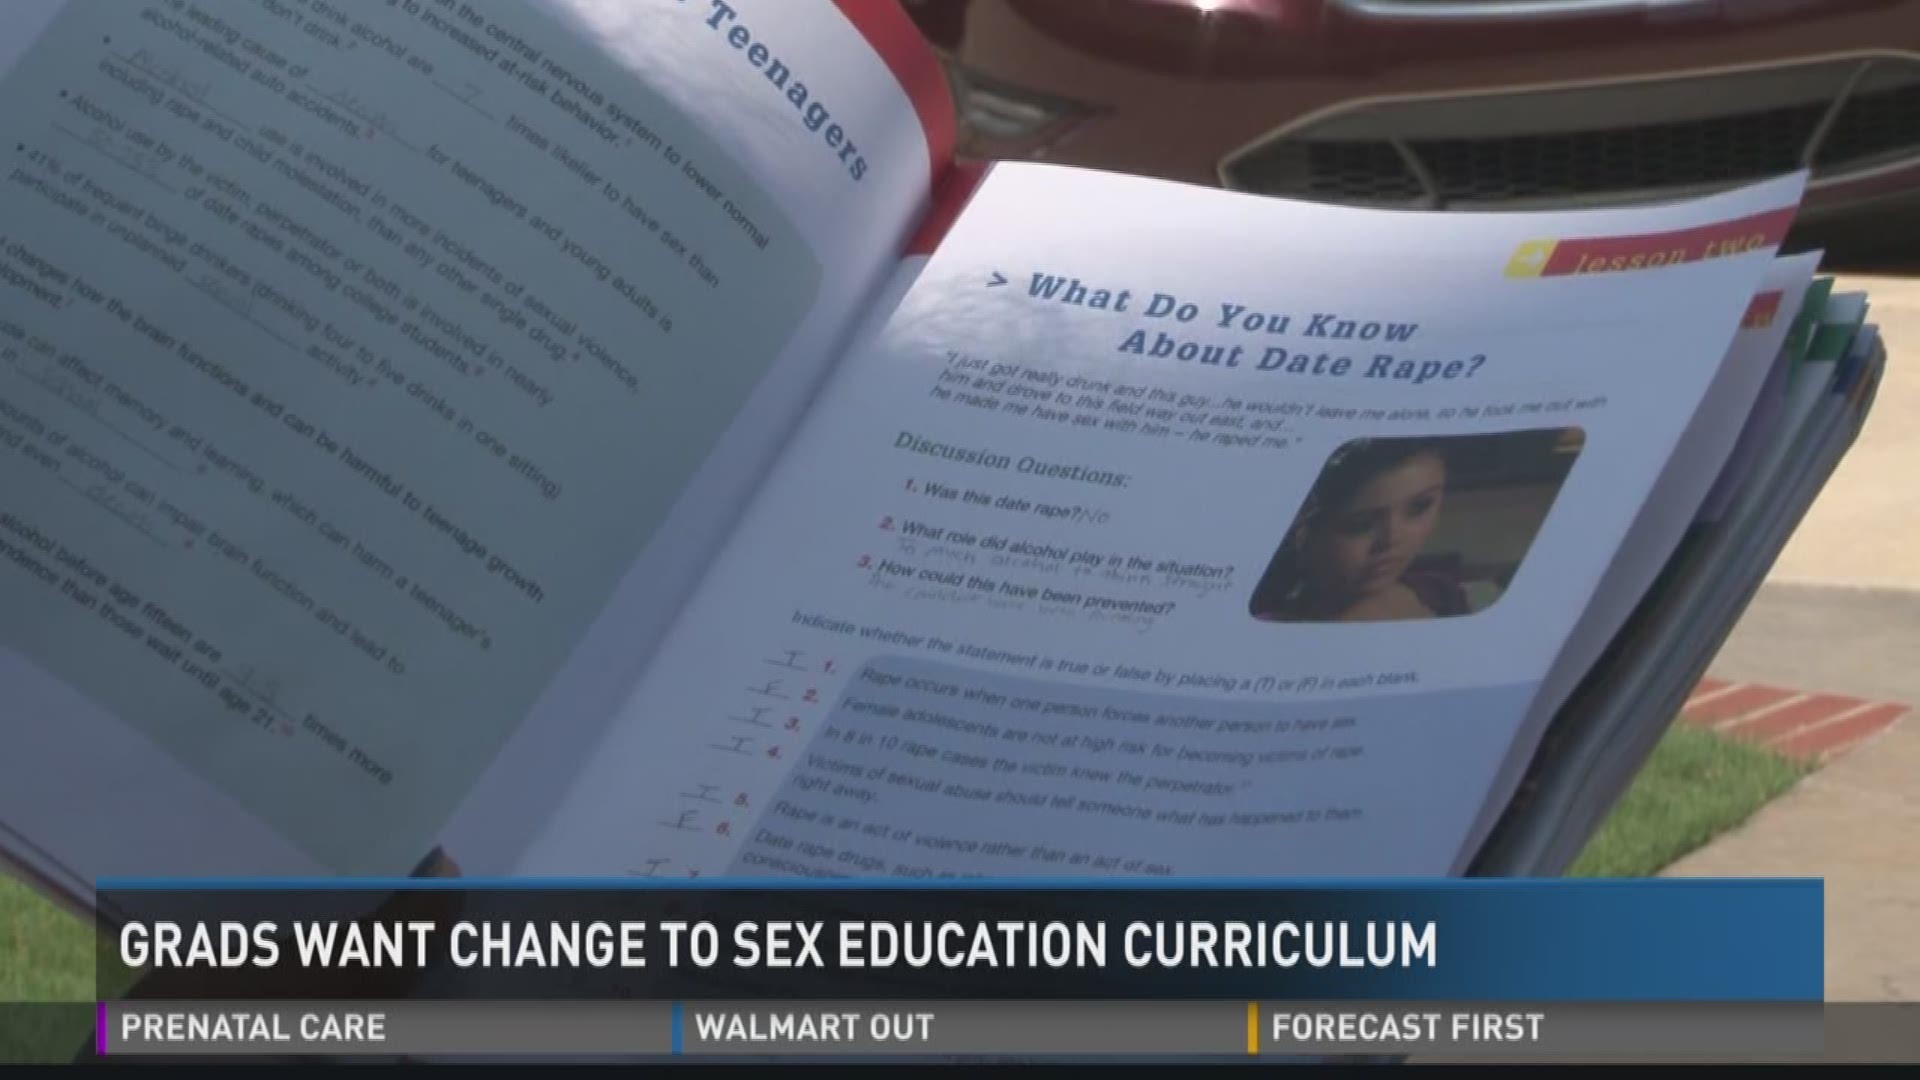 Grads want change to sex education curriculum